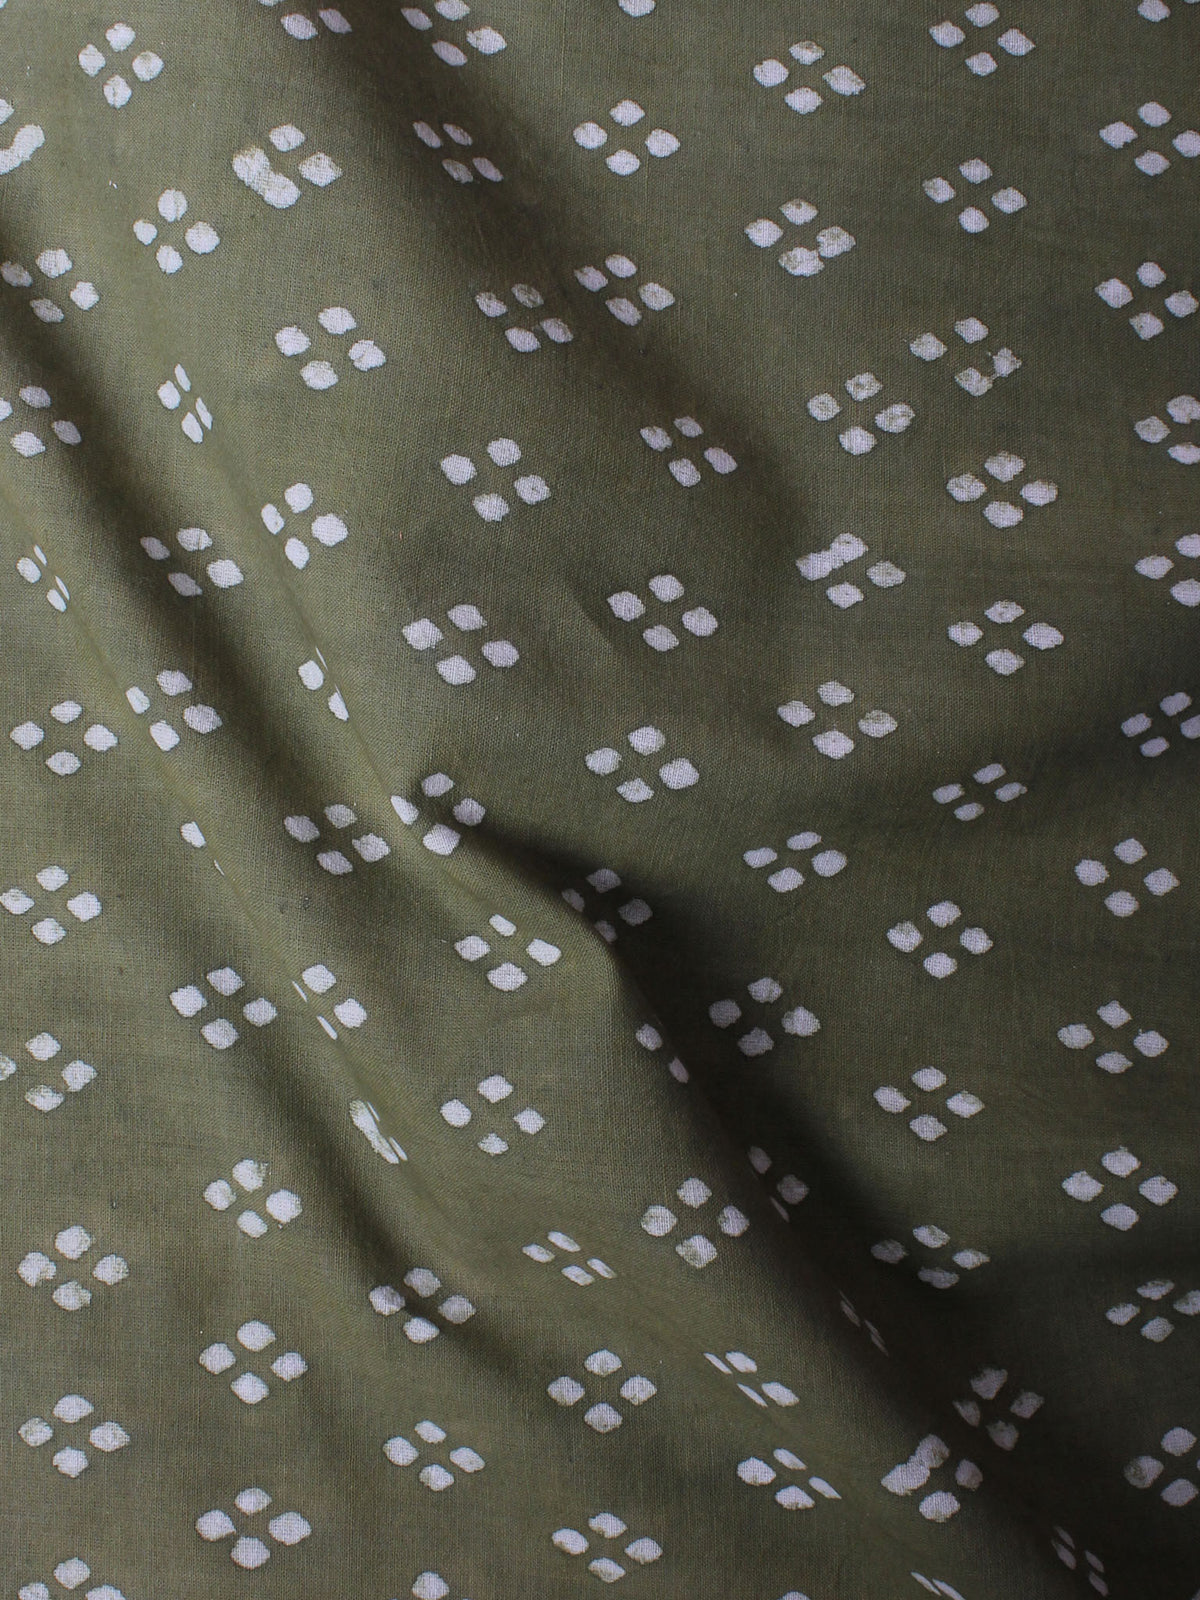 Olive Green White Hand Block Printed Cotton Cambric Fabric Per Meter - F0916445